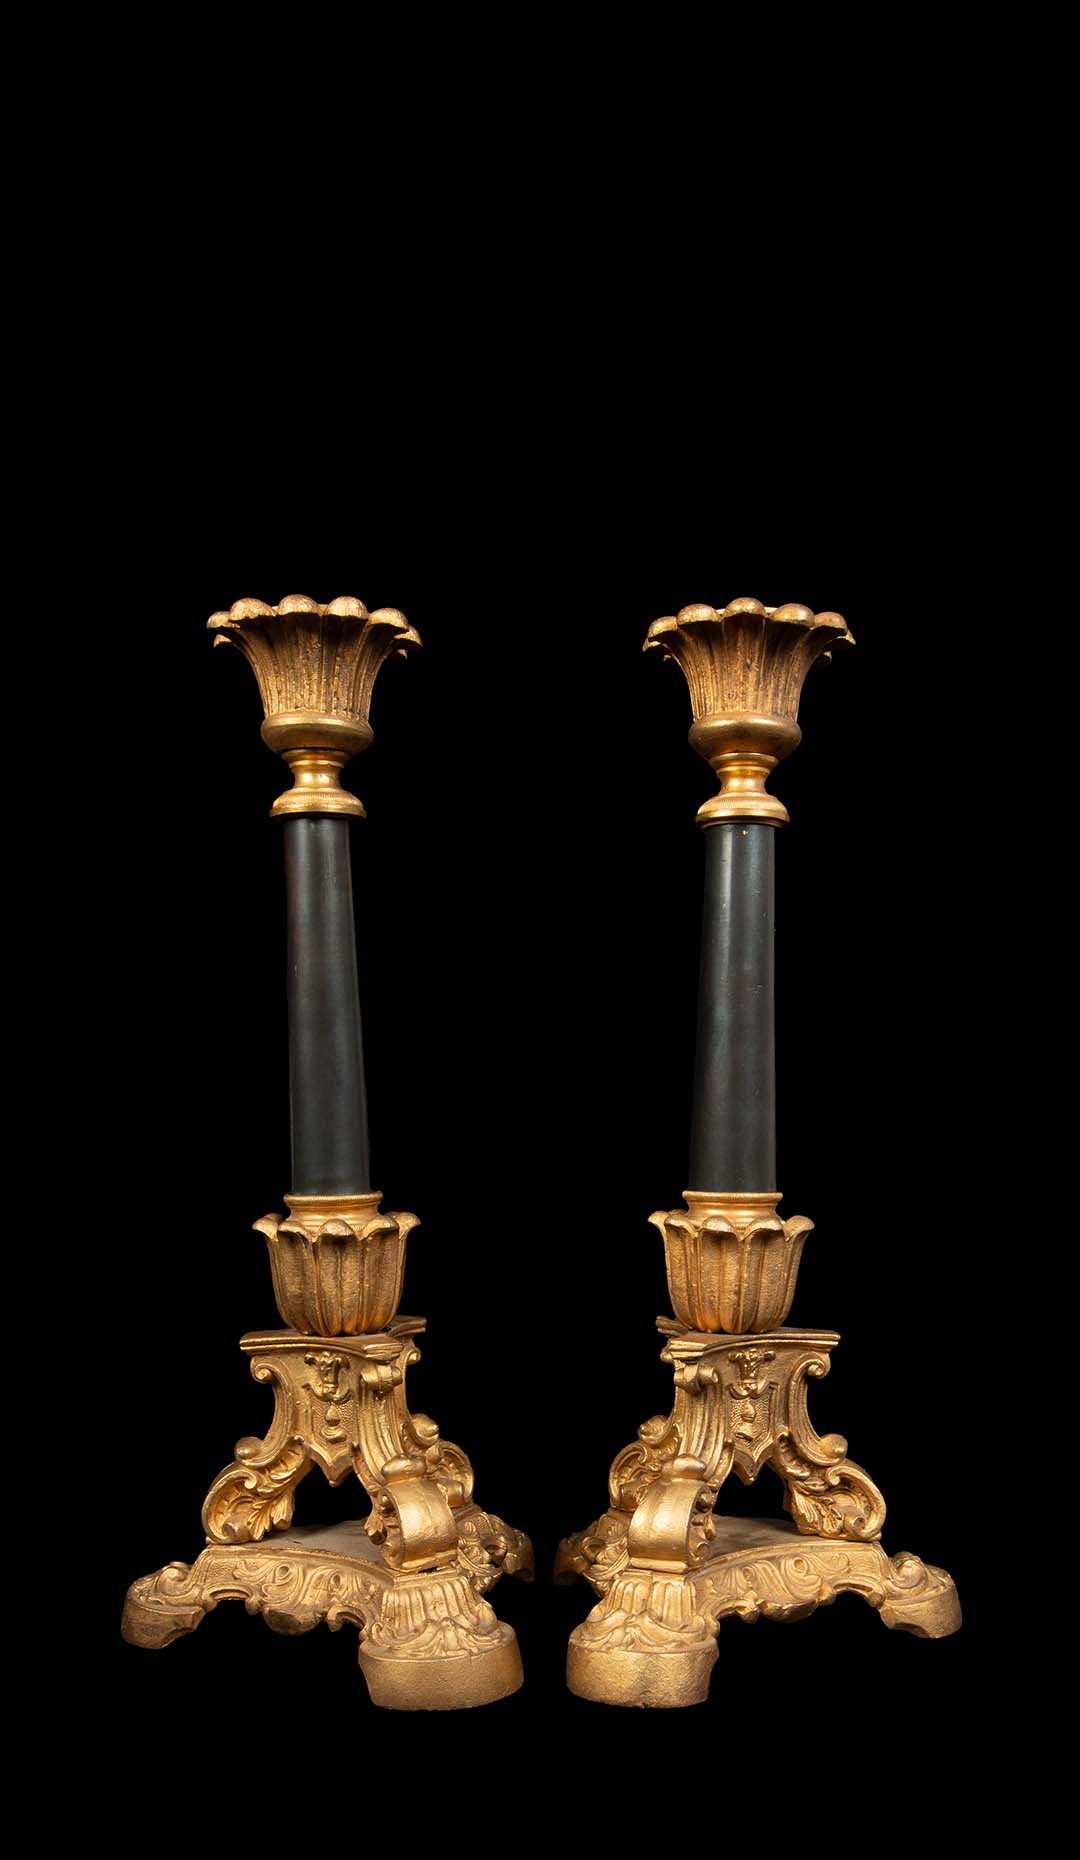 19th Century Gilt and Black Patinated Candle Sticks